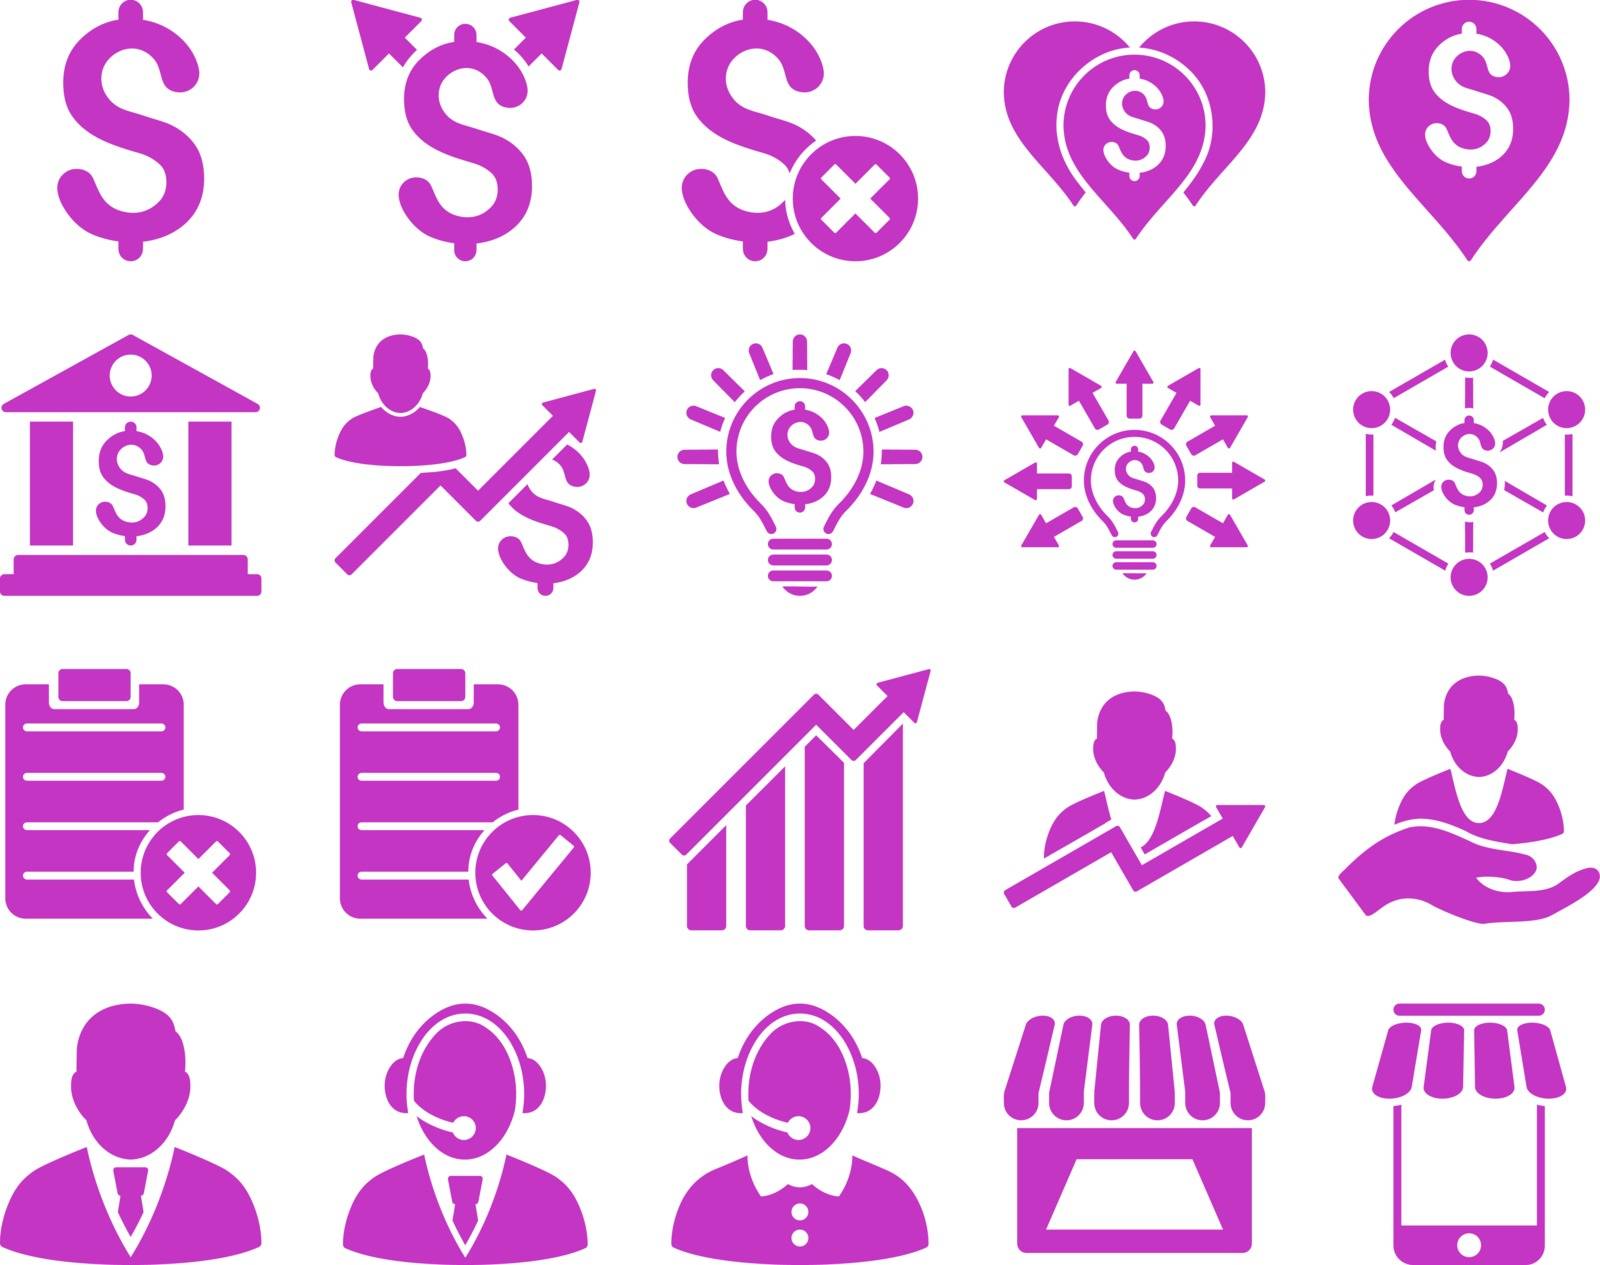 Trade business and bank service icon set. These flat icons use violet color. Images are isolated on a white background. Angles are rounded.